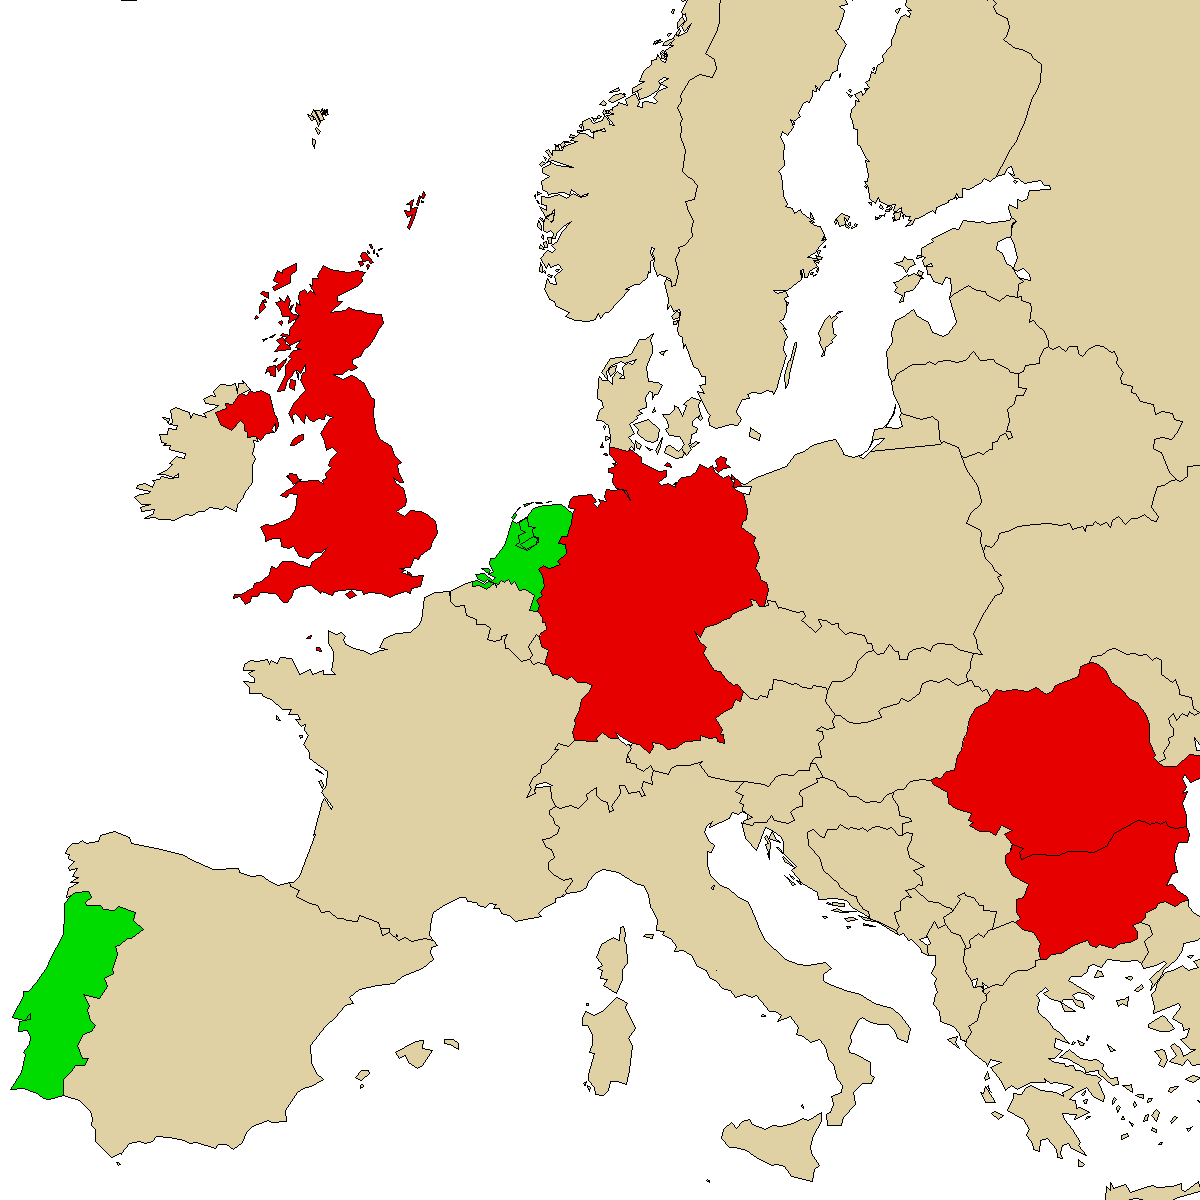 legal info map for our product 6APB, green are countries where we found no ban, red with ban, grey is unknown